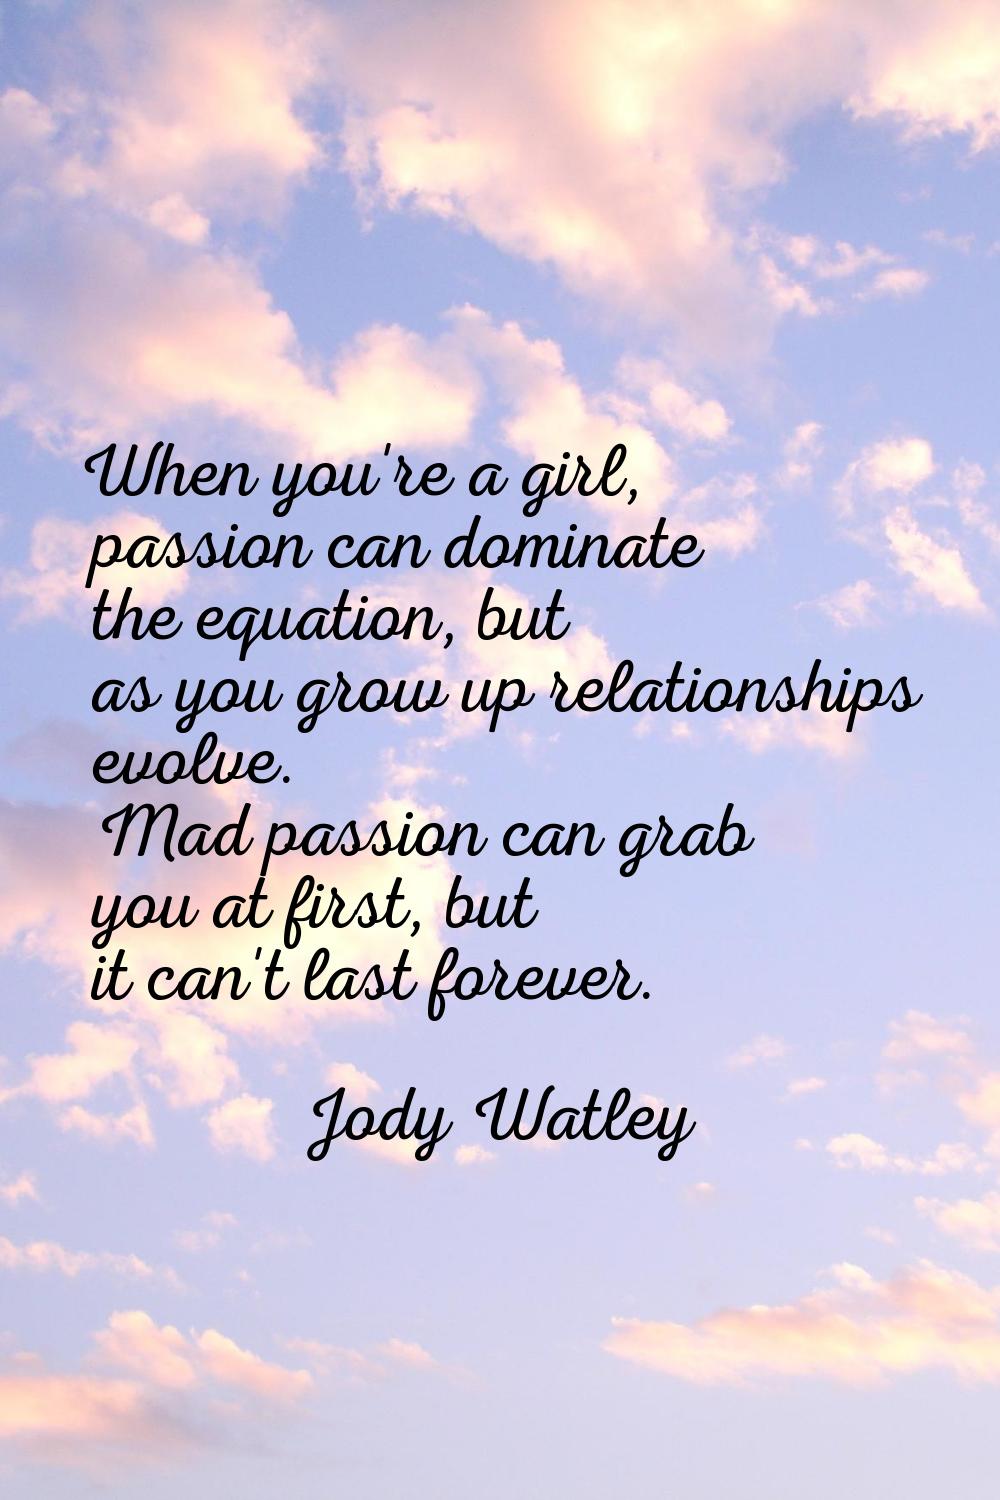 When you're a girl, passion can dominate the equation, but as you grow up relationships evolve. Mad